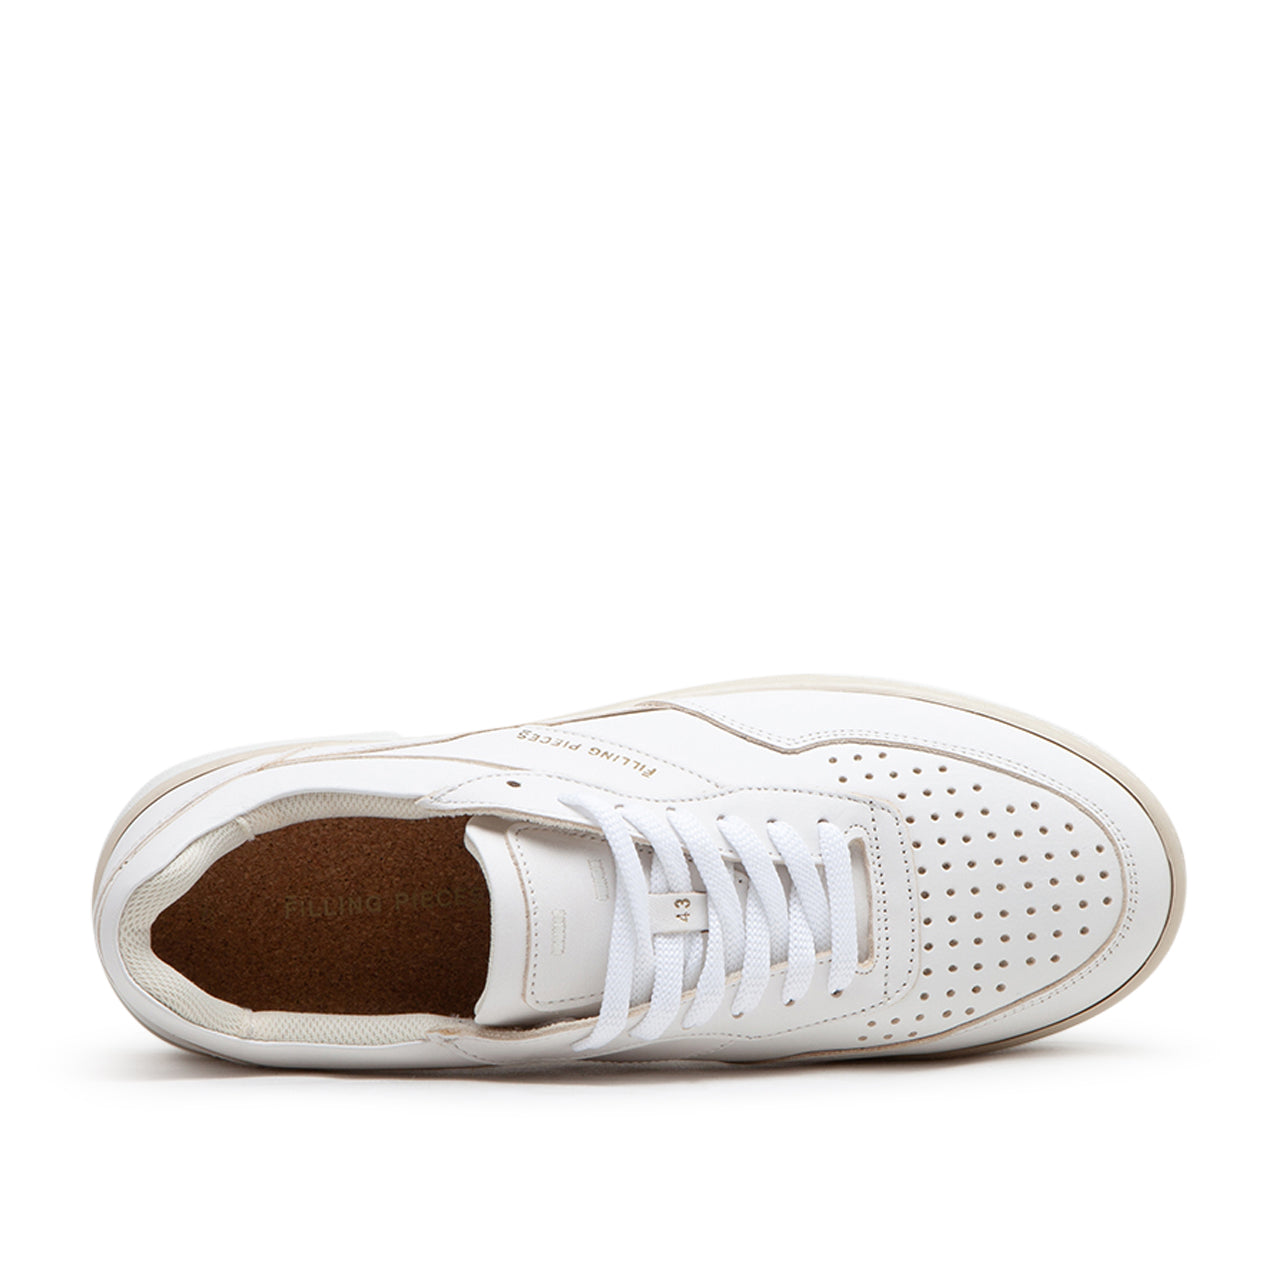 Filling Pieces Ace Spin (Weiß)  - Allike Store